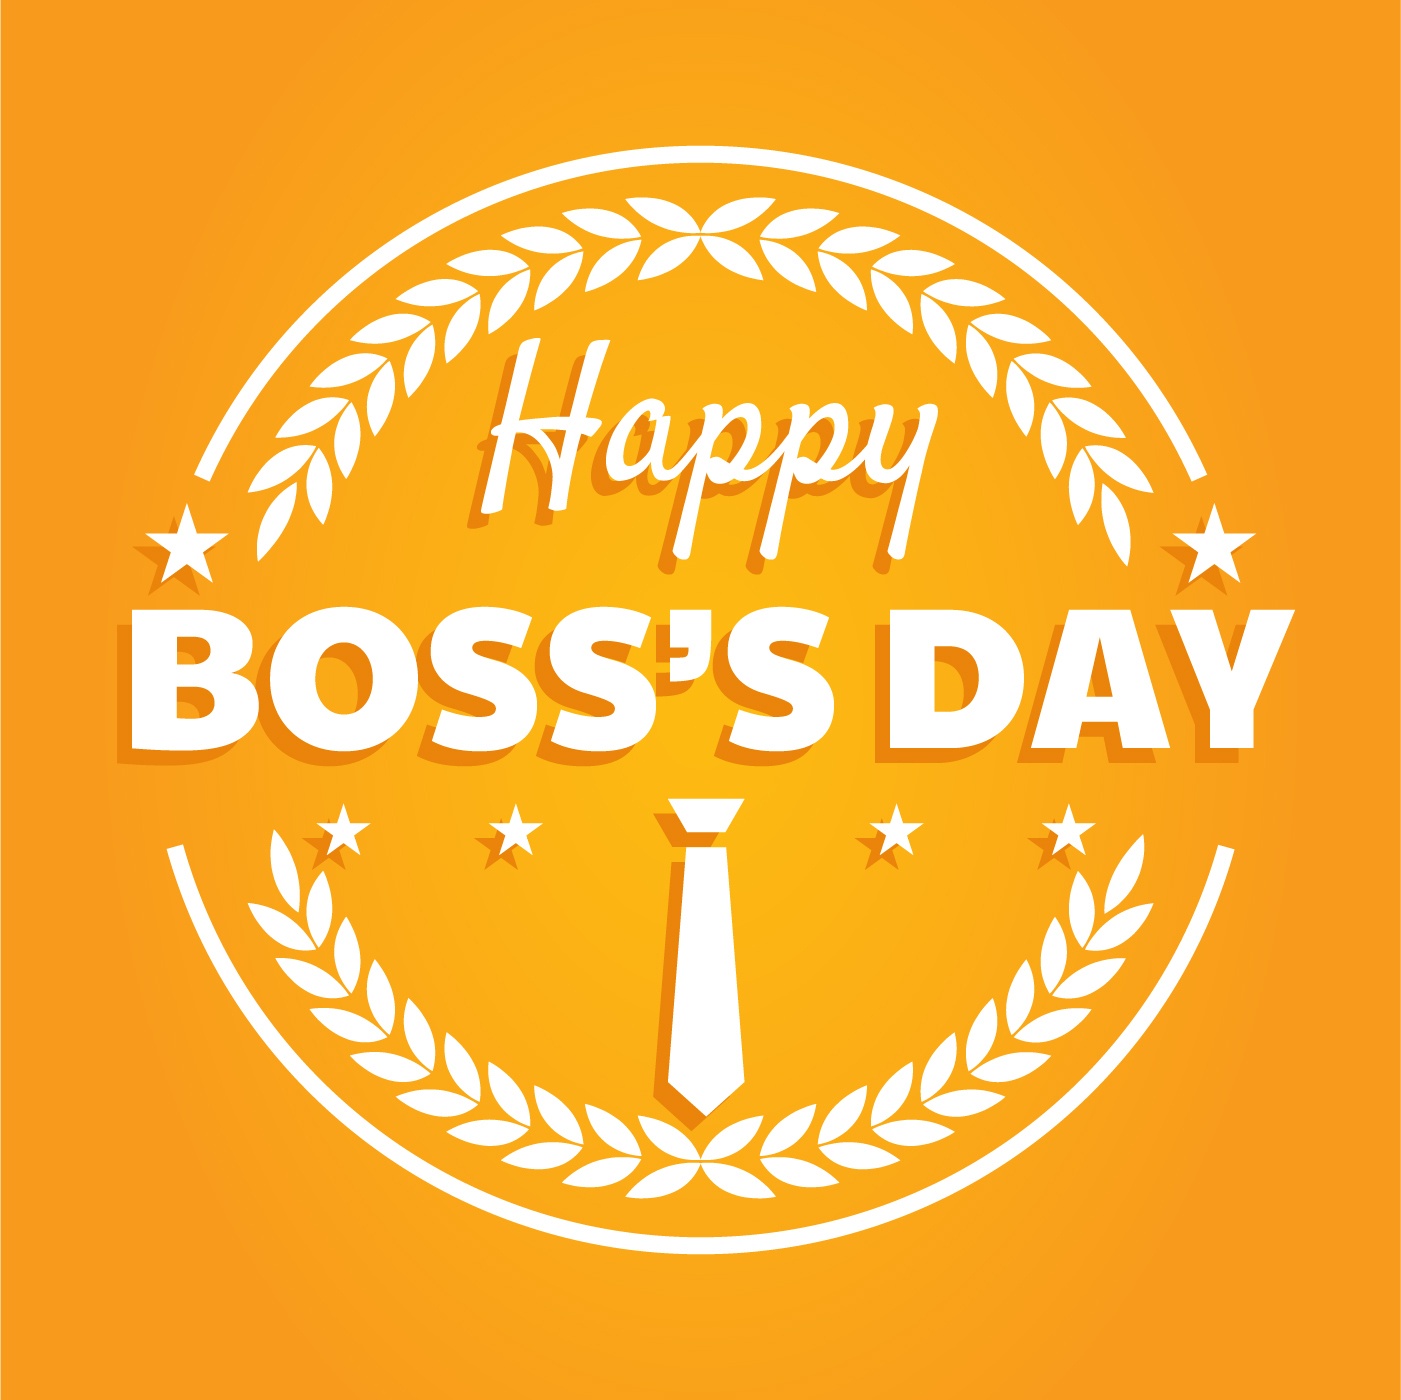 Happy Boss Day Wishes Greeting Cards, Free Ecards &amp;amp; Gift Cards - Boss Day Cards Free Printable